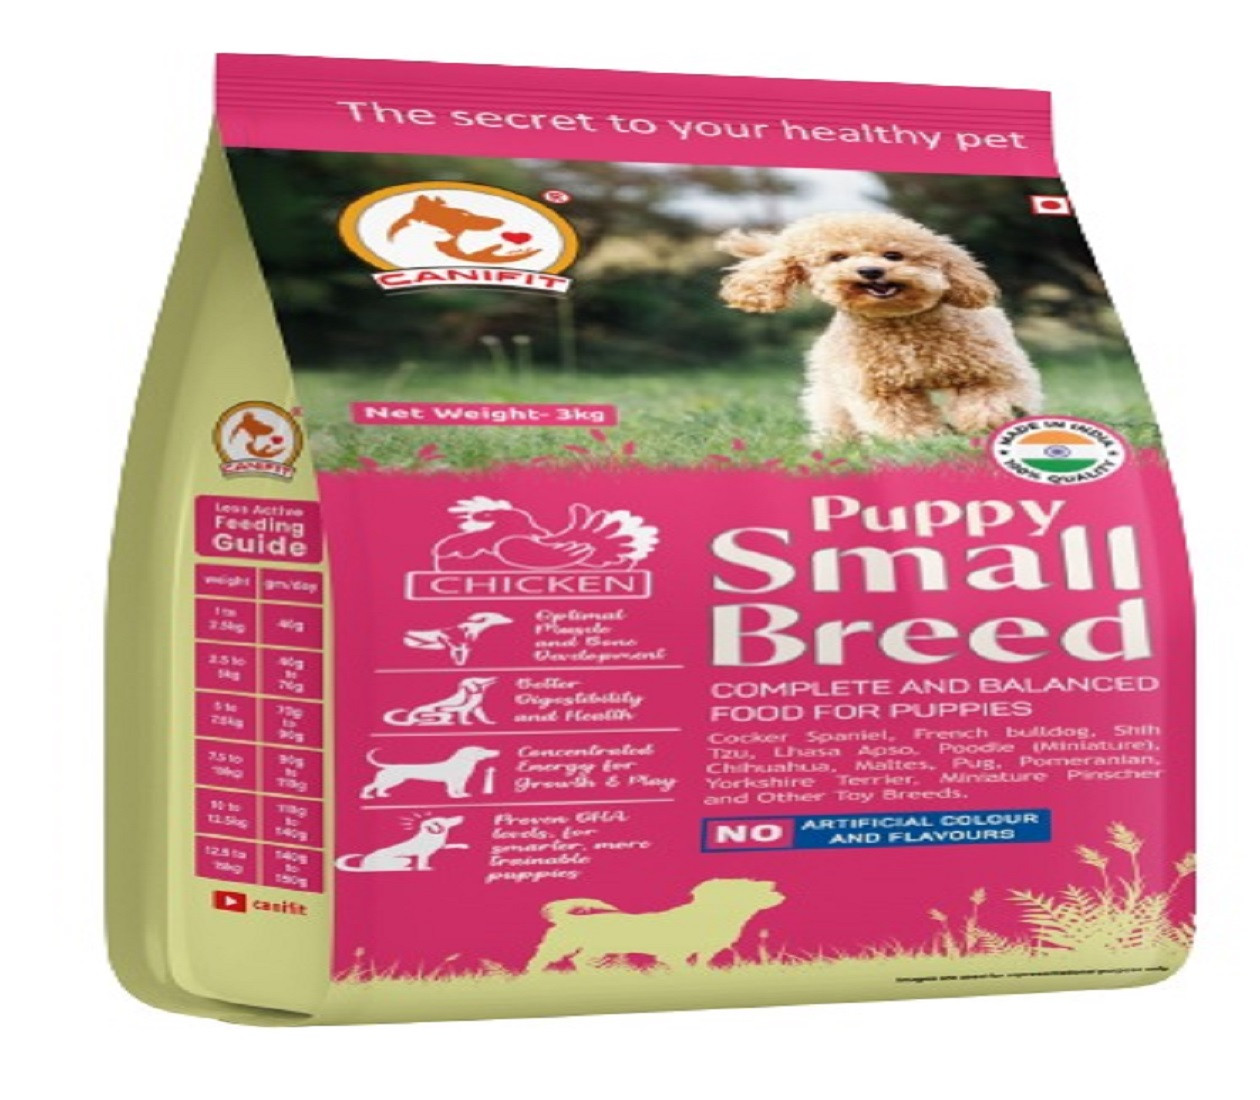 CANIFIT PUPPY SMALL BREED FOOD (CHICKEN)